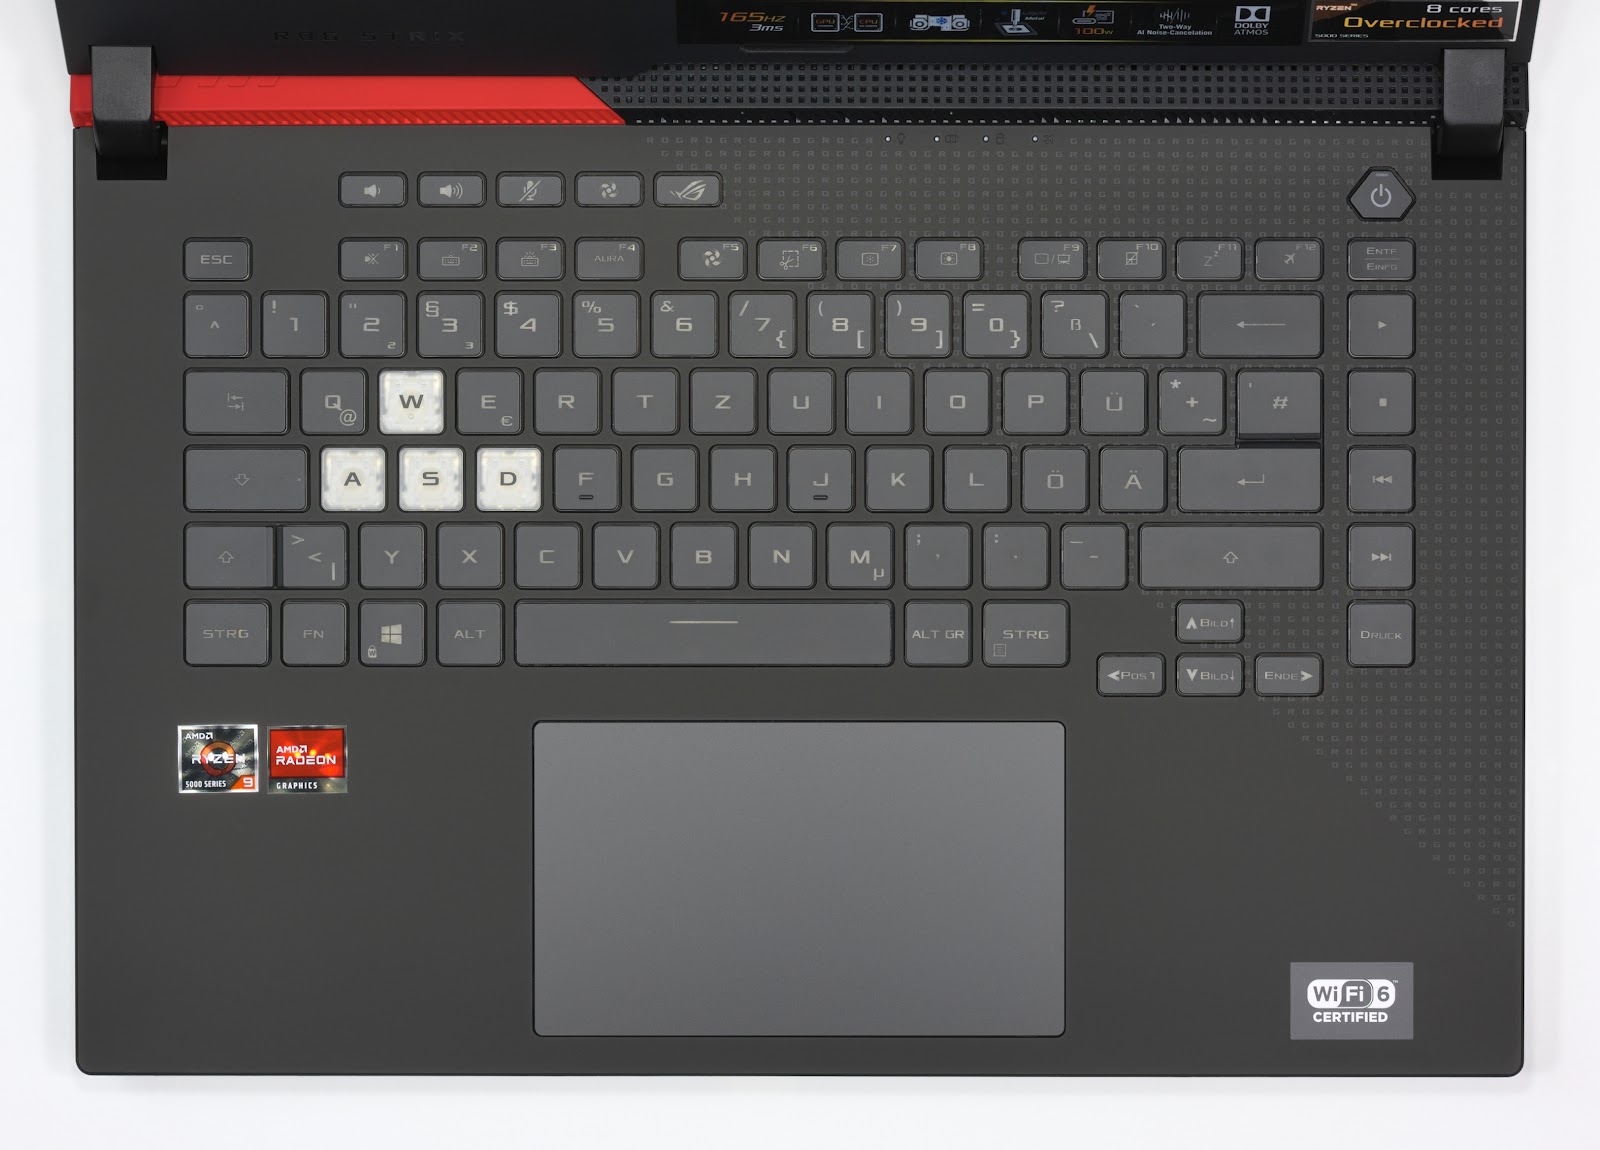 This image shows the full keyboard of laptop from upper angle.